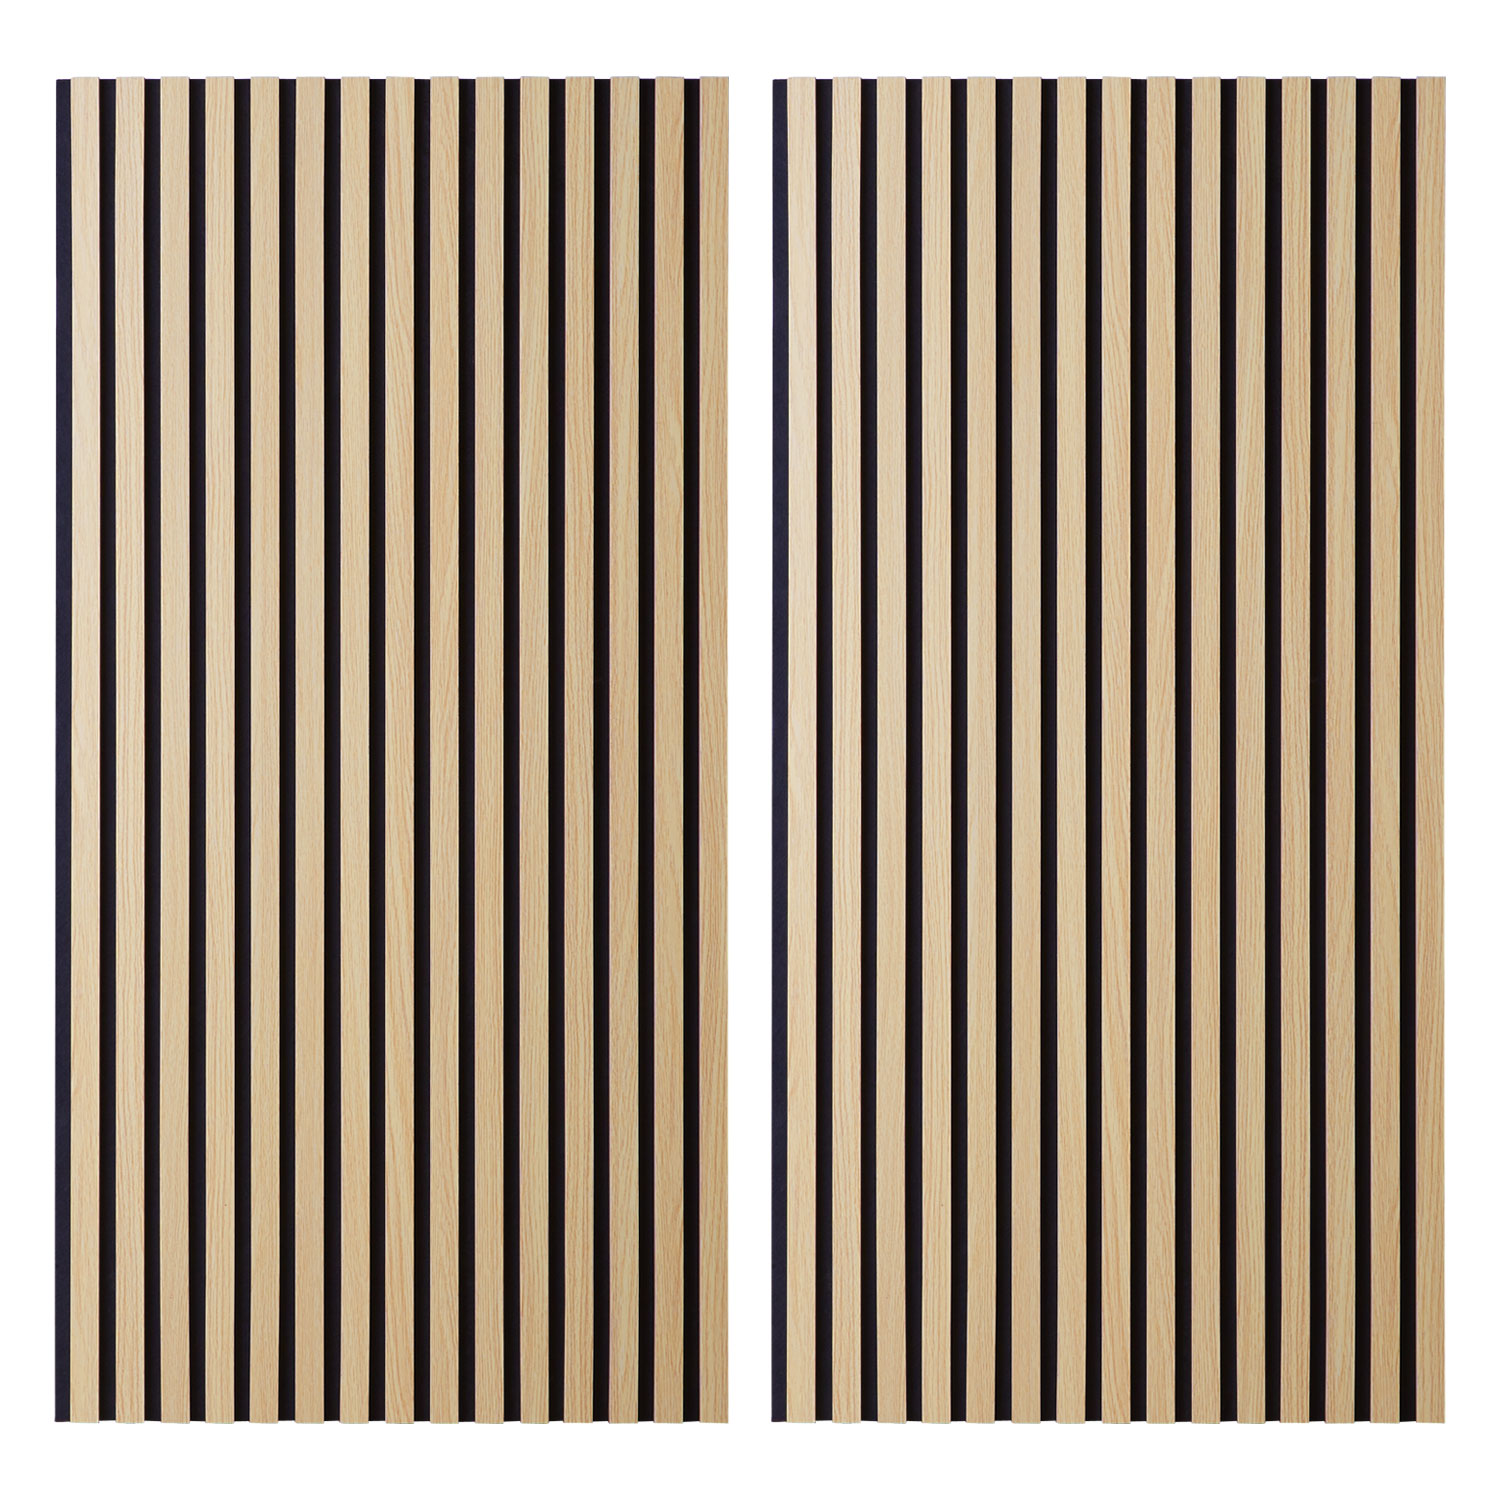 1, 2 or 4 Wall panels 60 x 120 cm Wood paneling for walls Acoustic panels Bedroom paneling Wall cladding Acoustic sound panels Sound proof panels